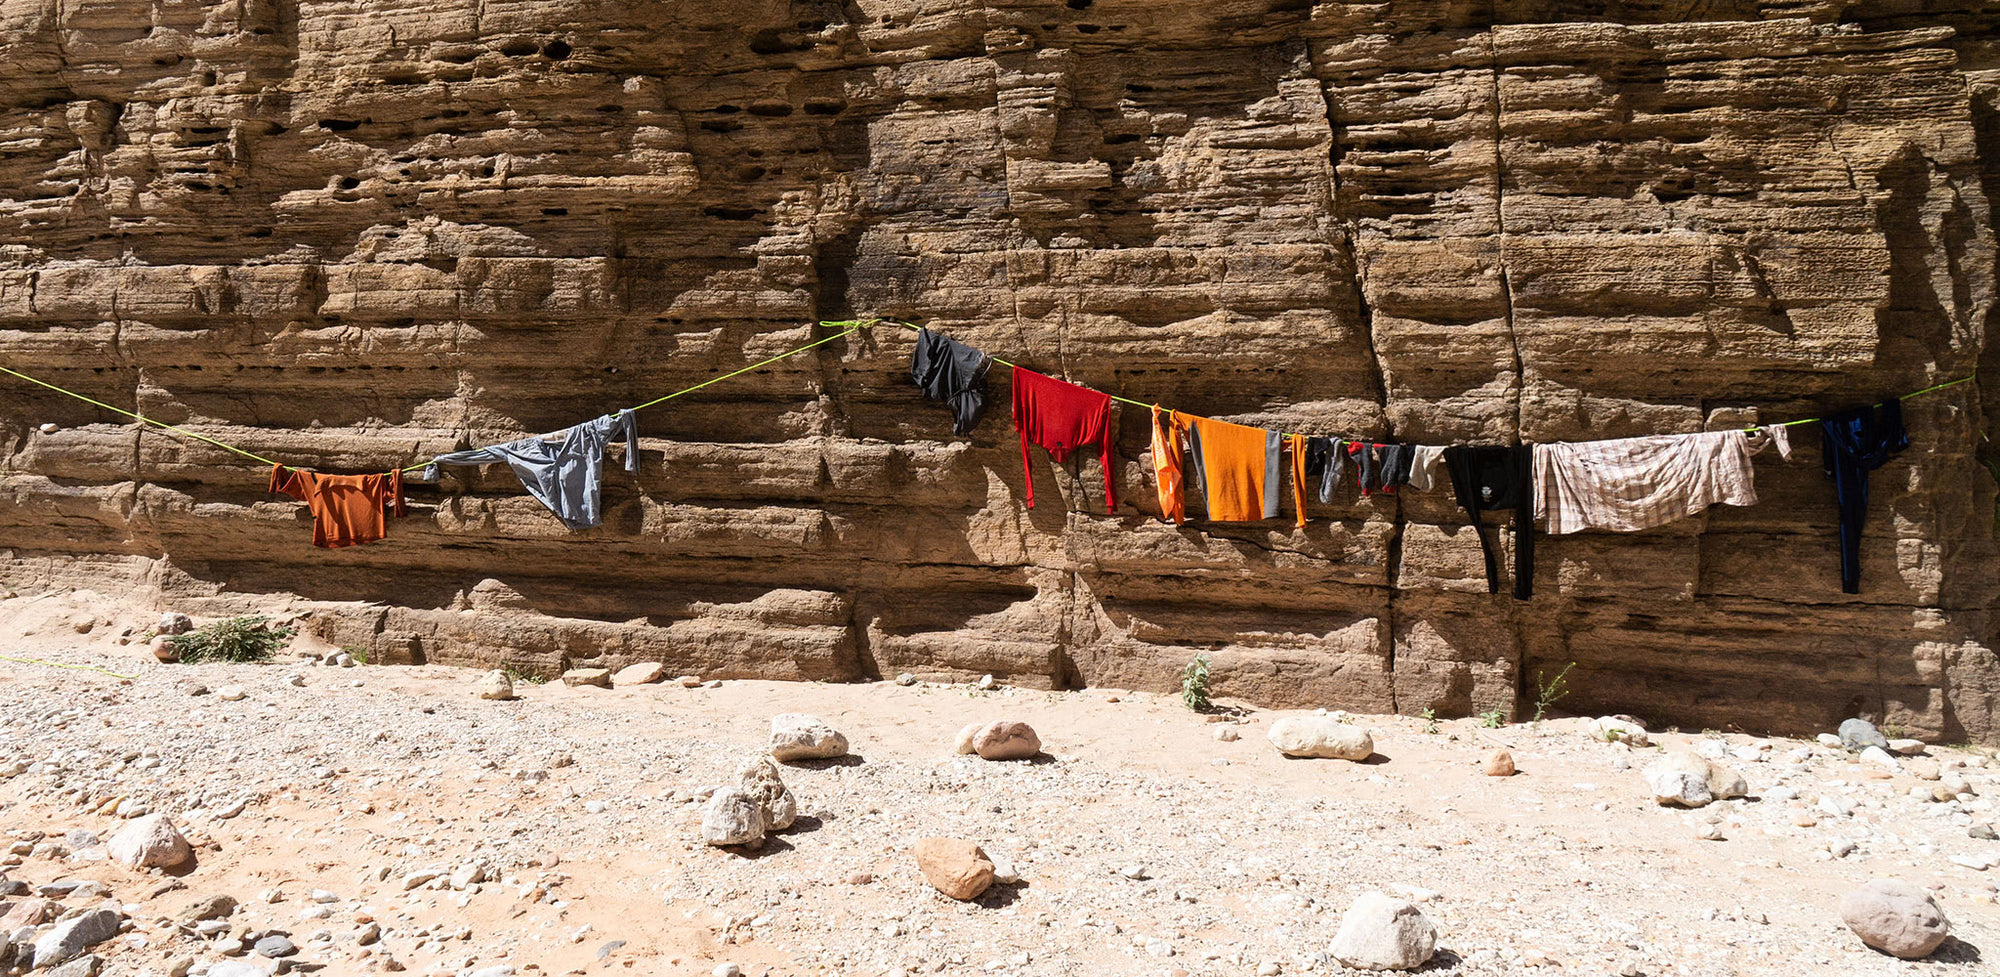 Clothes drying on a line in the desert.